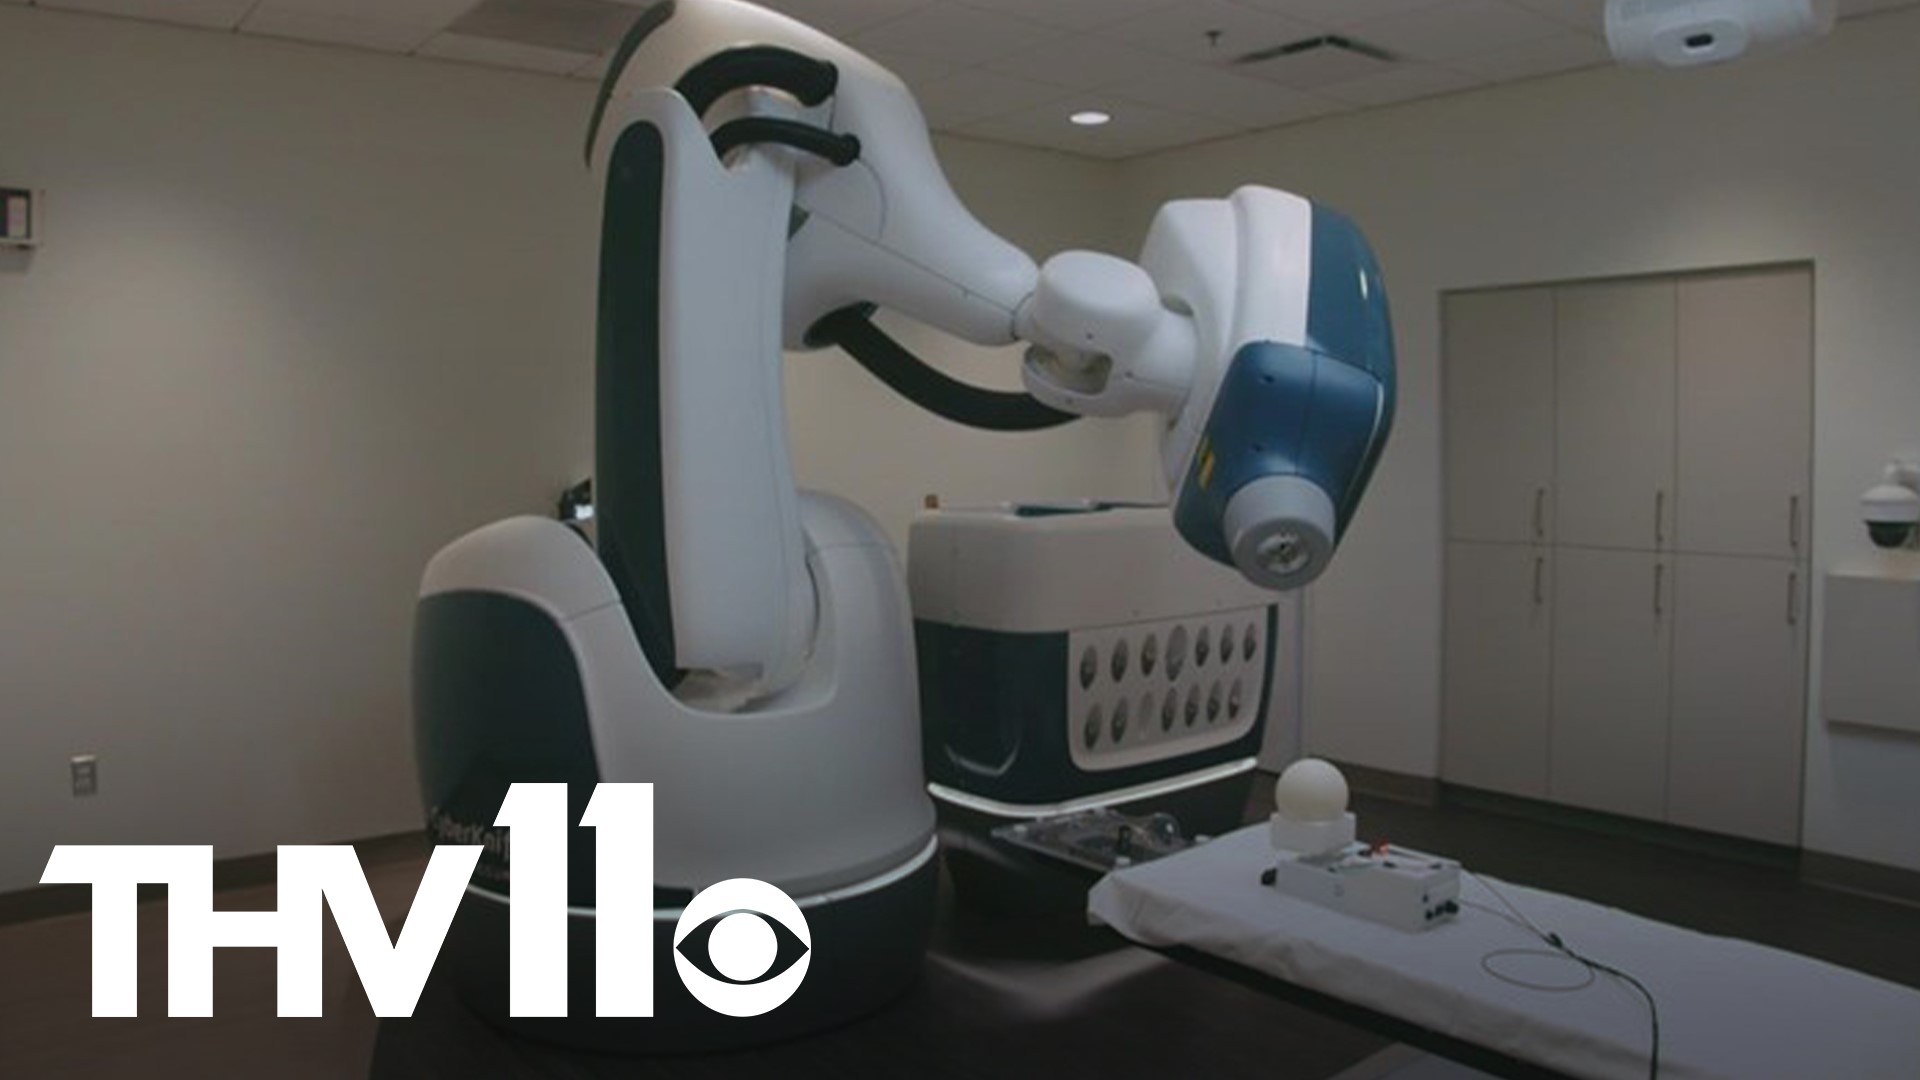 Arkansas is now the home of a revolutionary robot helping cancer patients across the state.